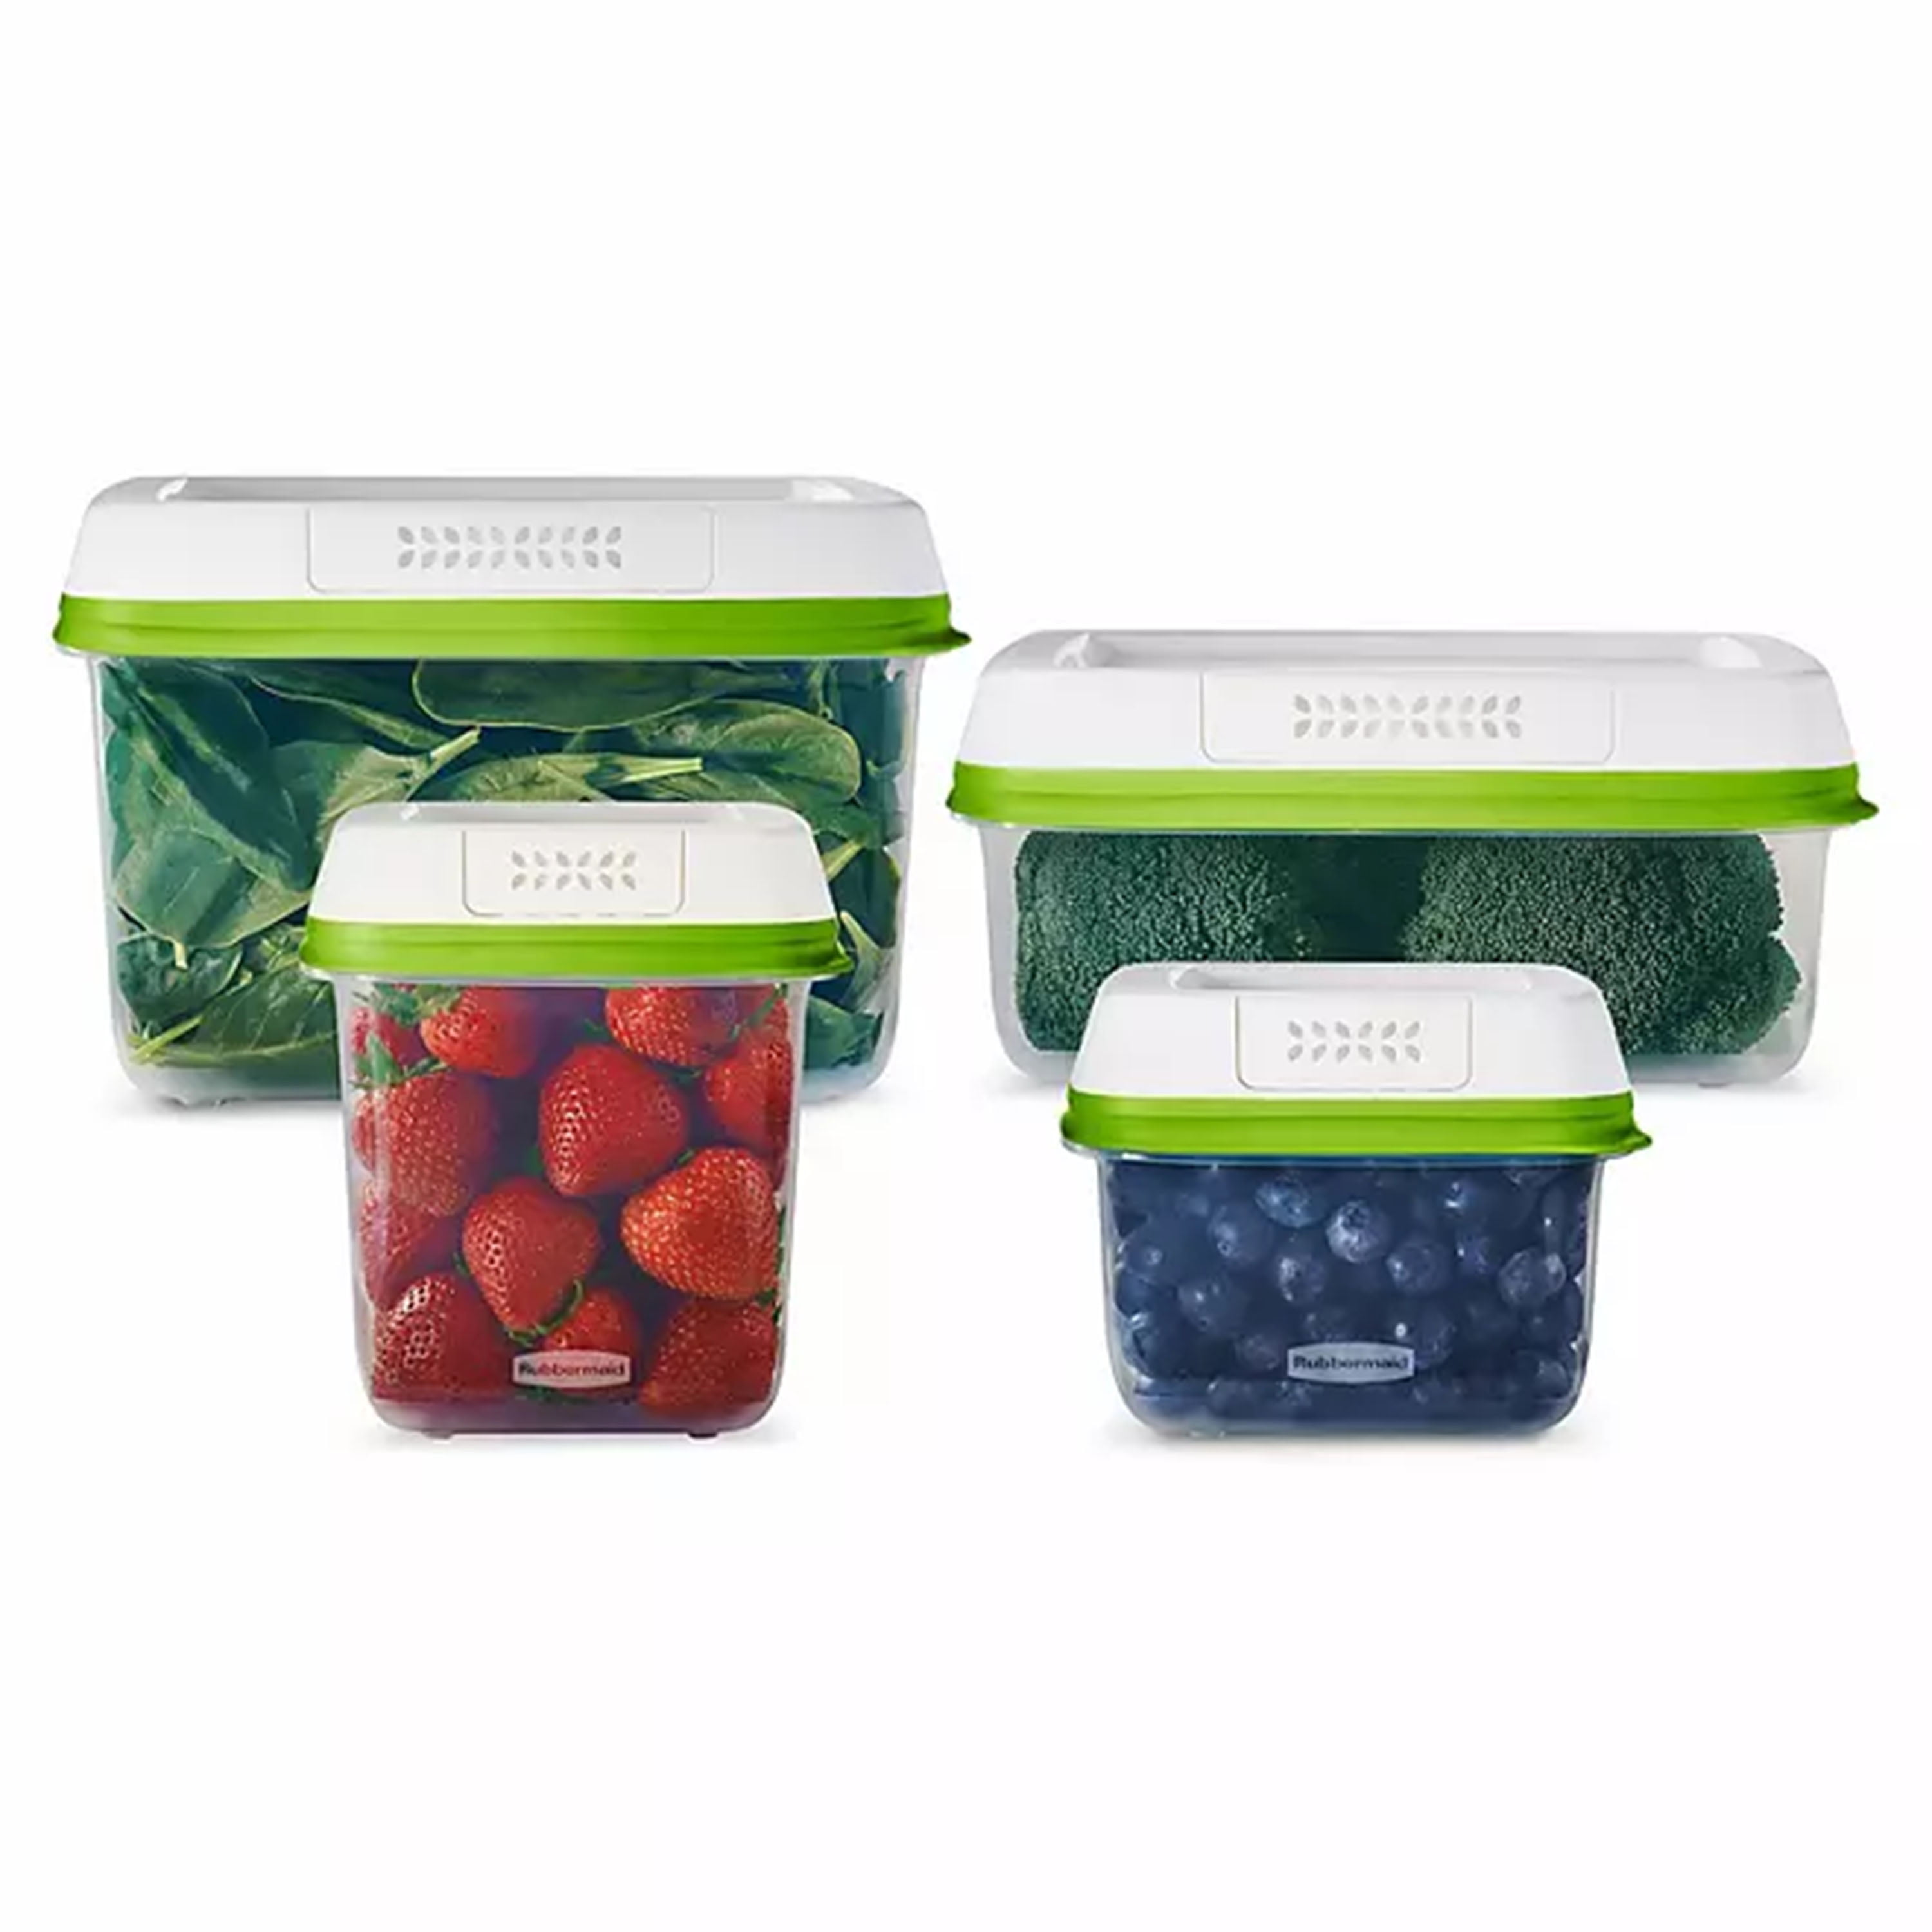 Rubbermaid Freshworks Produce Saver Containers Set, 2 pc - Fry's